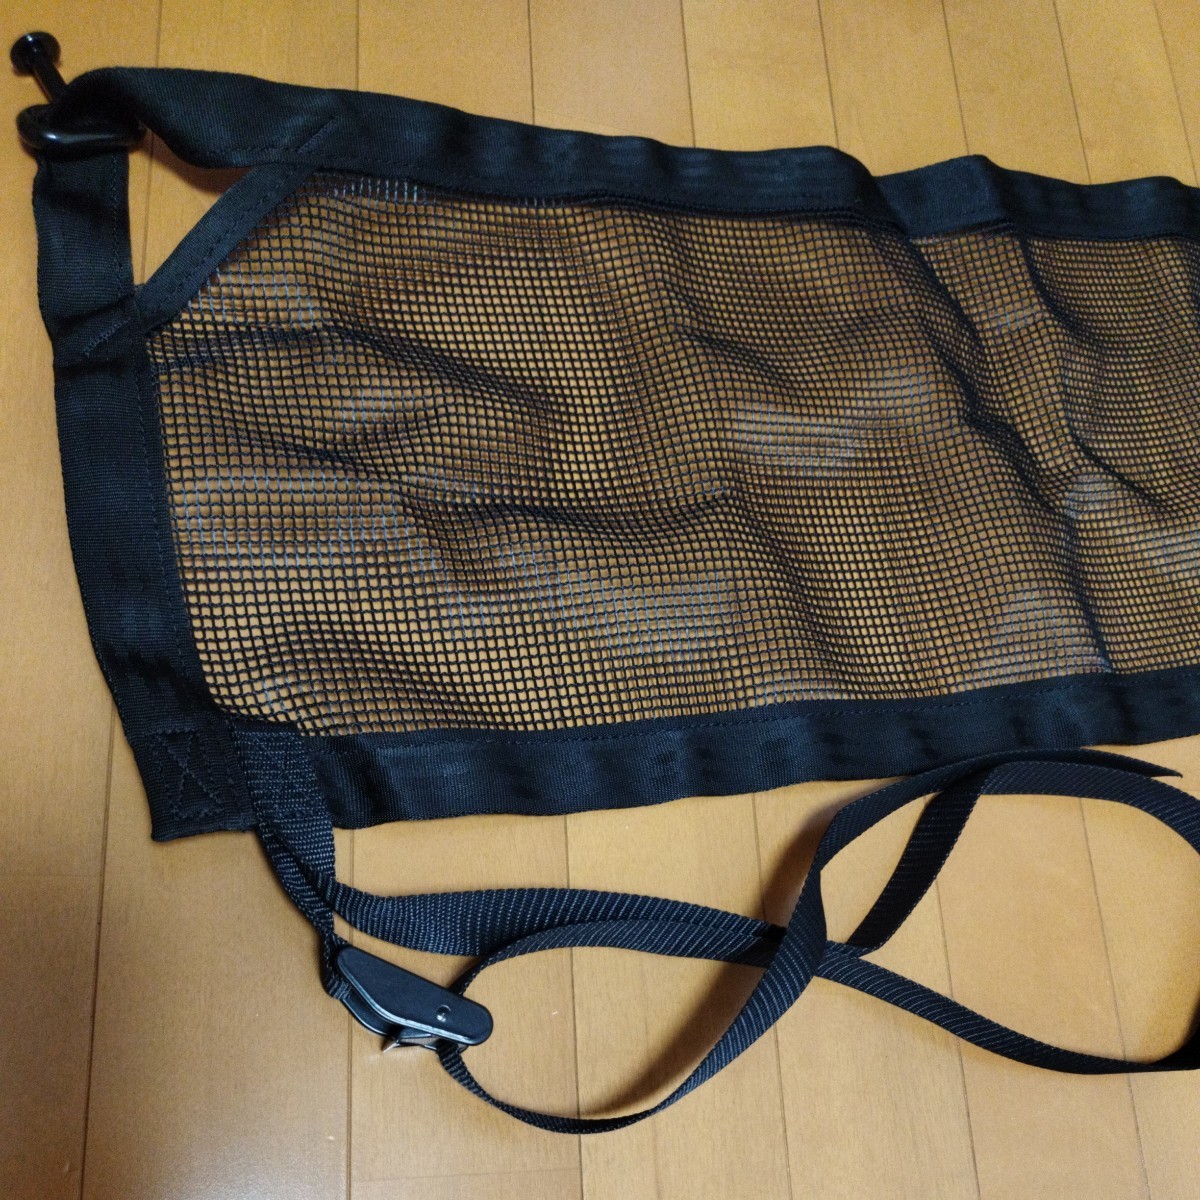  beautiful goods * Jaguar F-PACE Fpe chair genuine products luggage net trunk net cargo net HK8M-46406-AC exclusive use sack attaching 